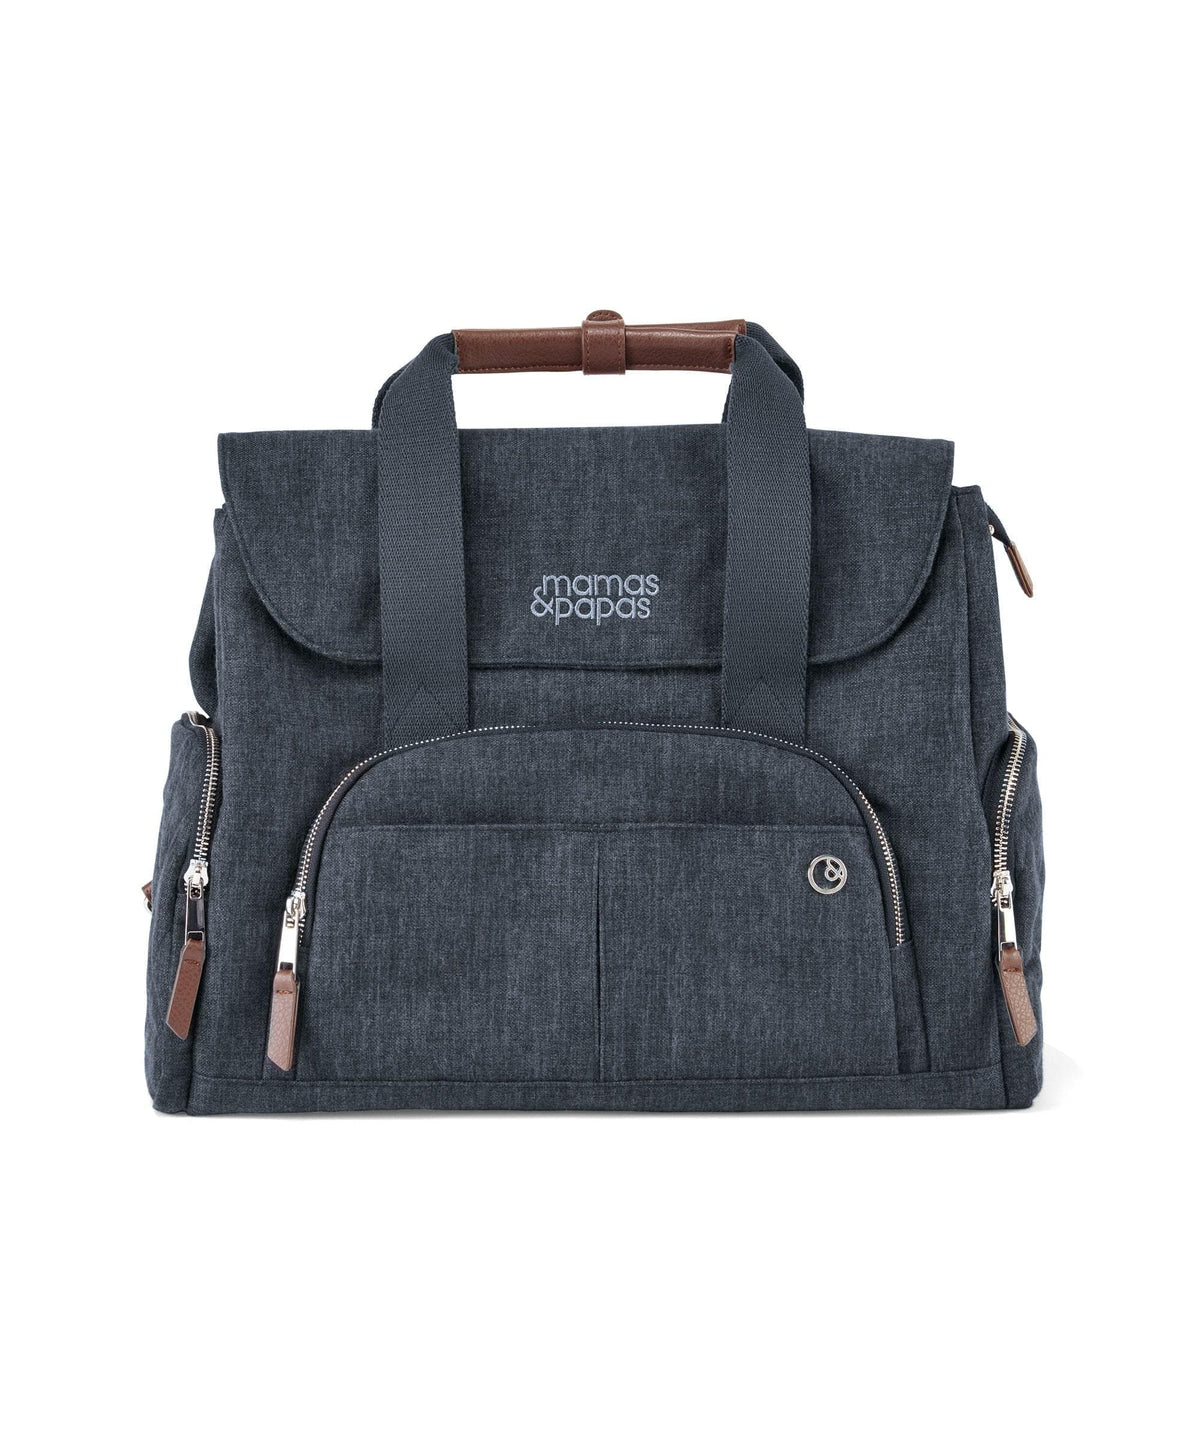 Mamas & Papas Bowling Style Changing Bag - Navy Flannel